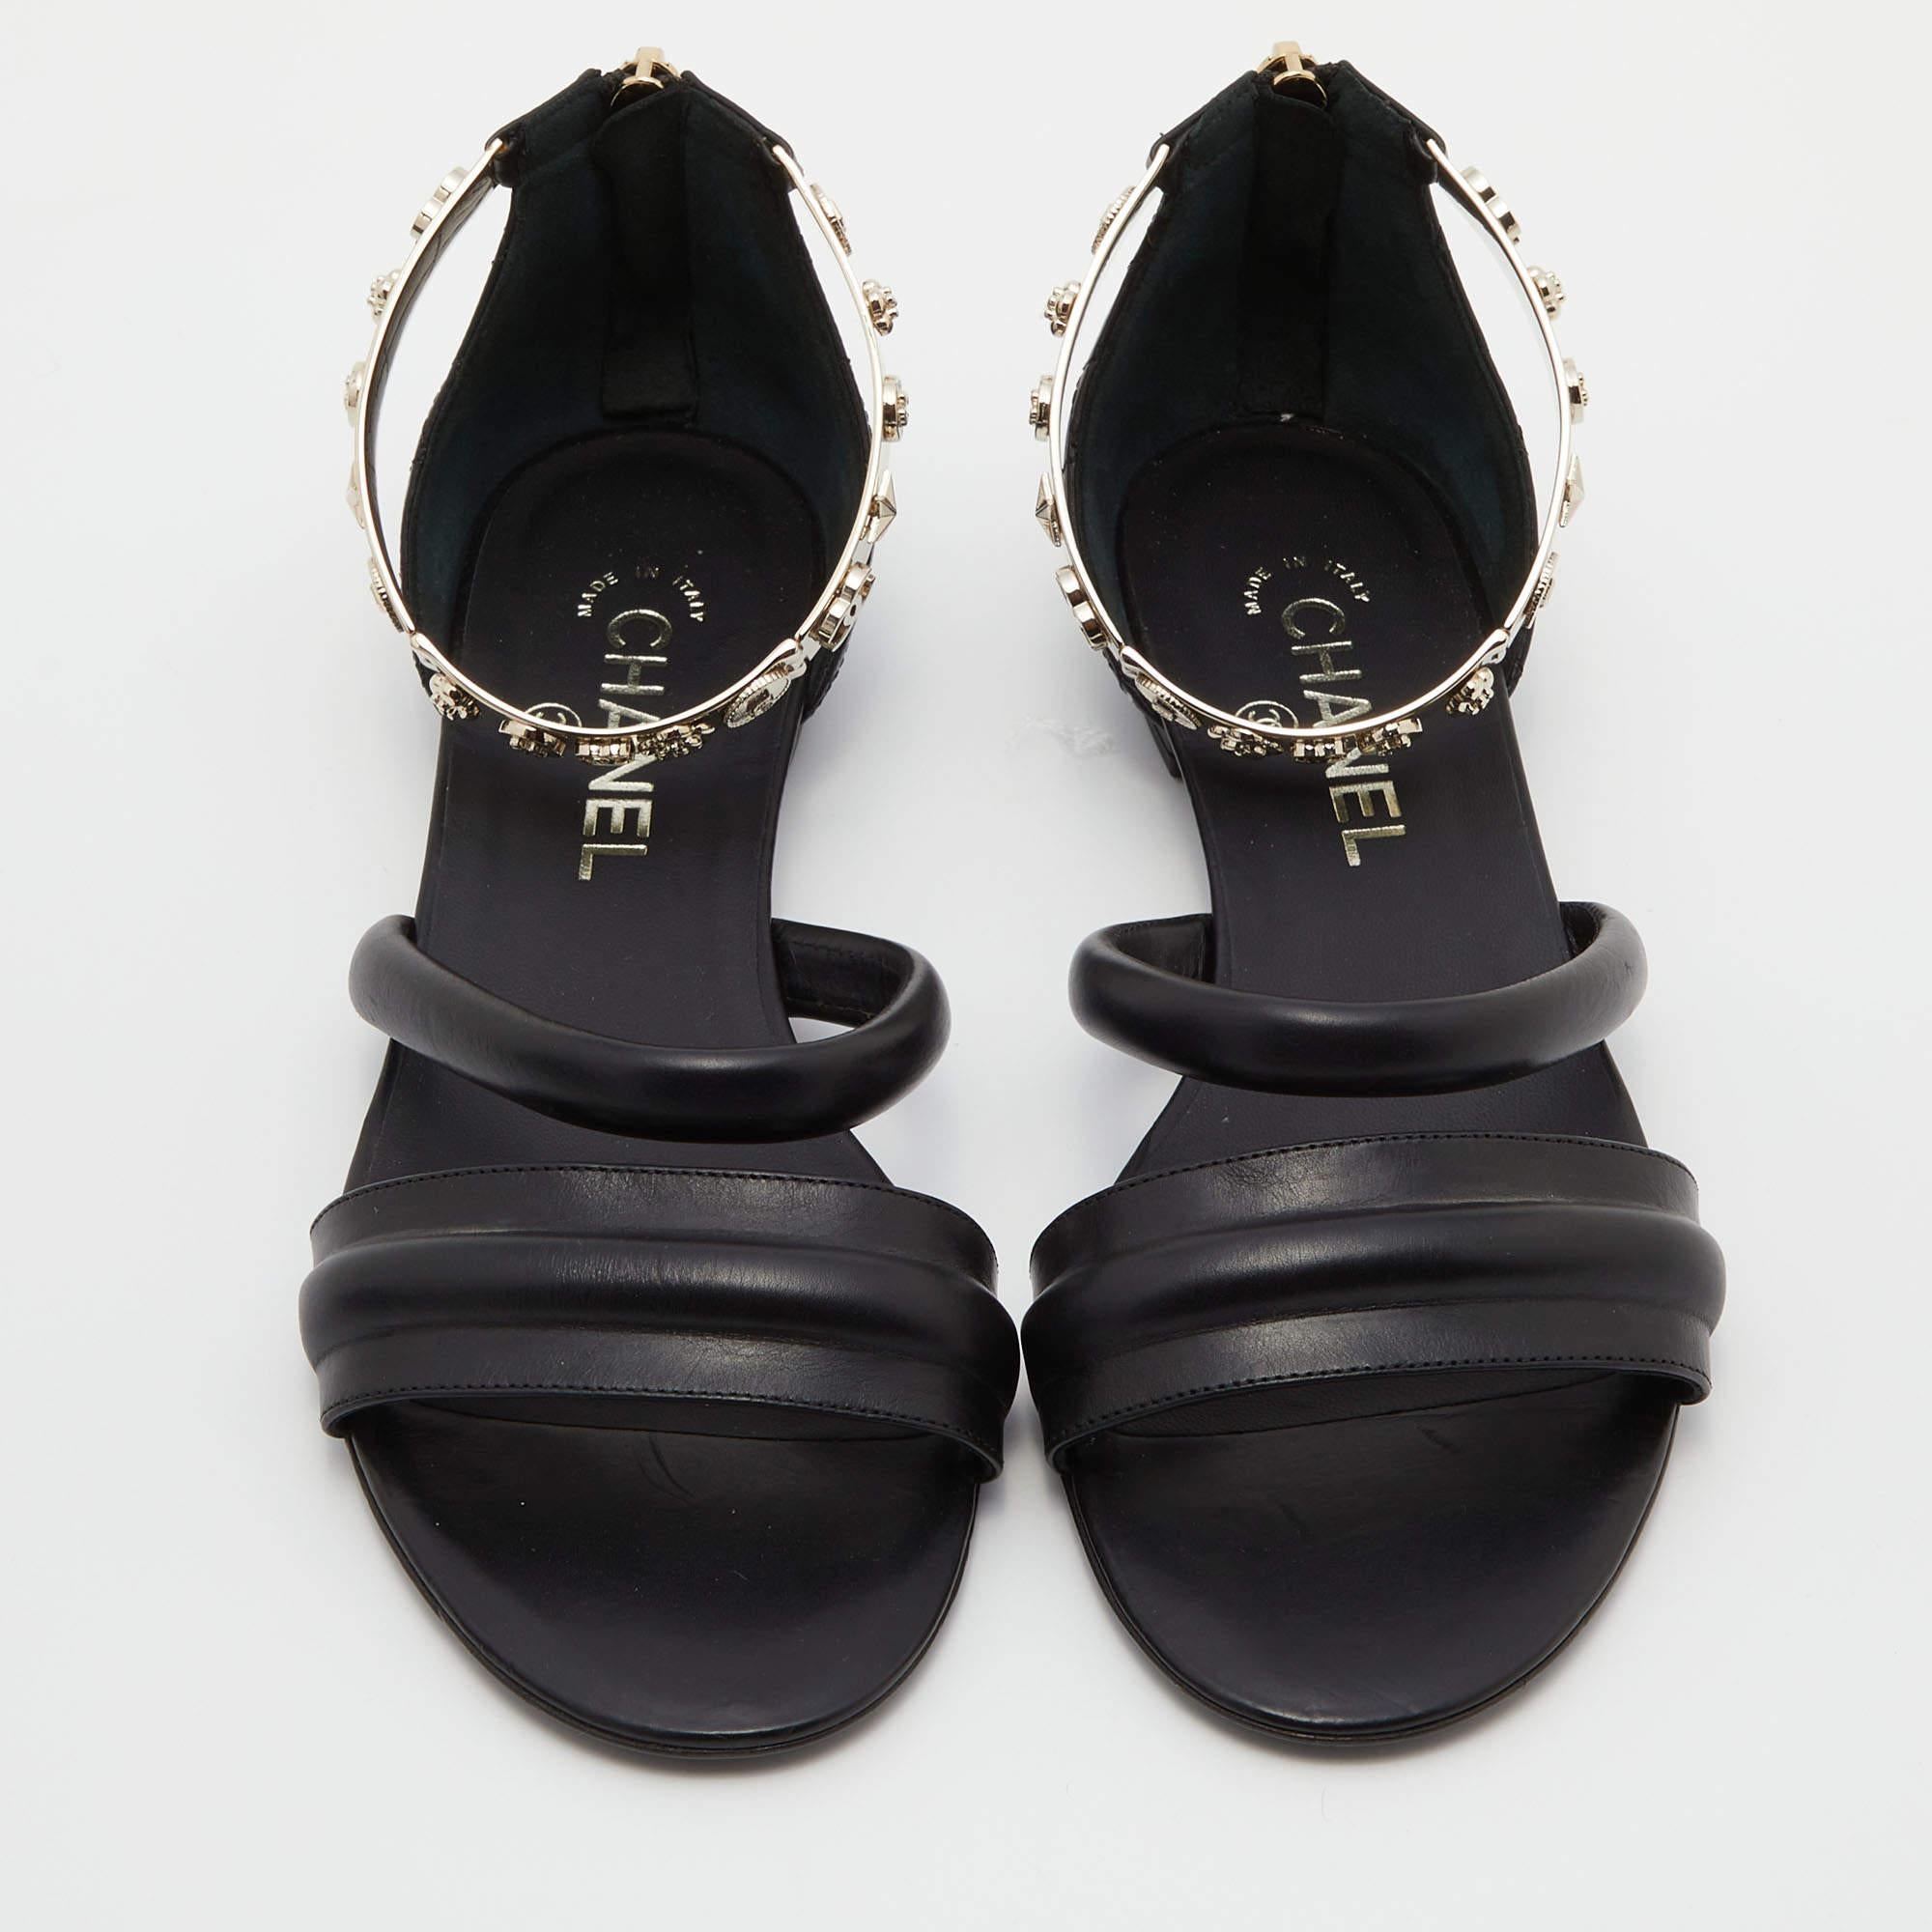 These sandals embody the perfect blend of edgy and timeless style. Crafted from quality materials, these shoes will offer you the perfect height for a sophisticated look

